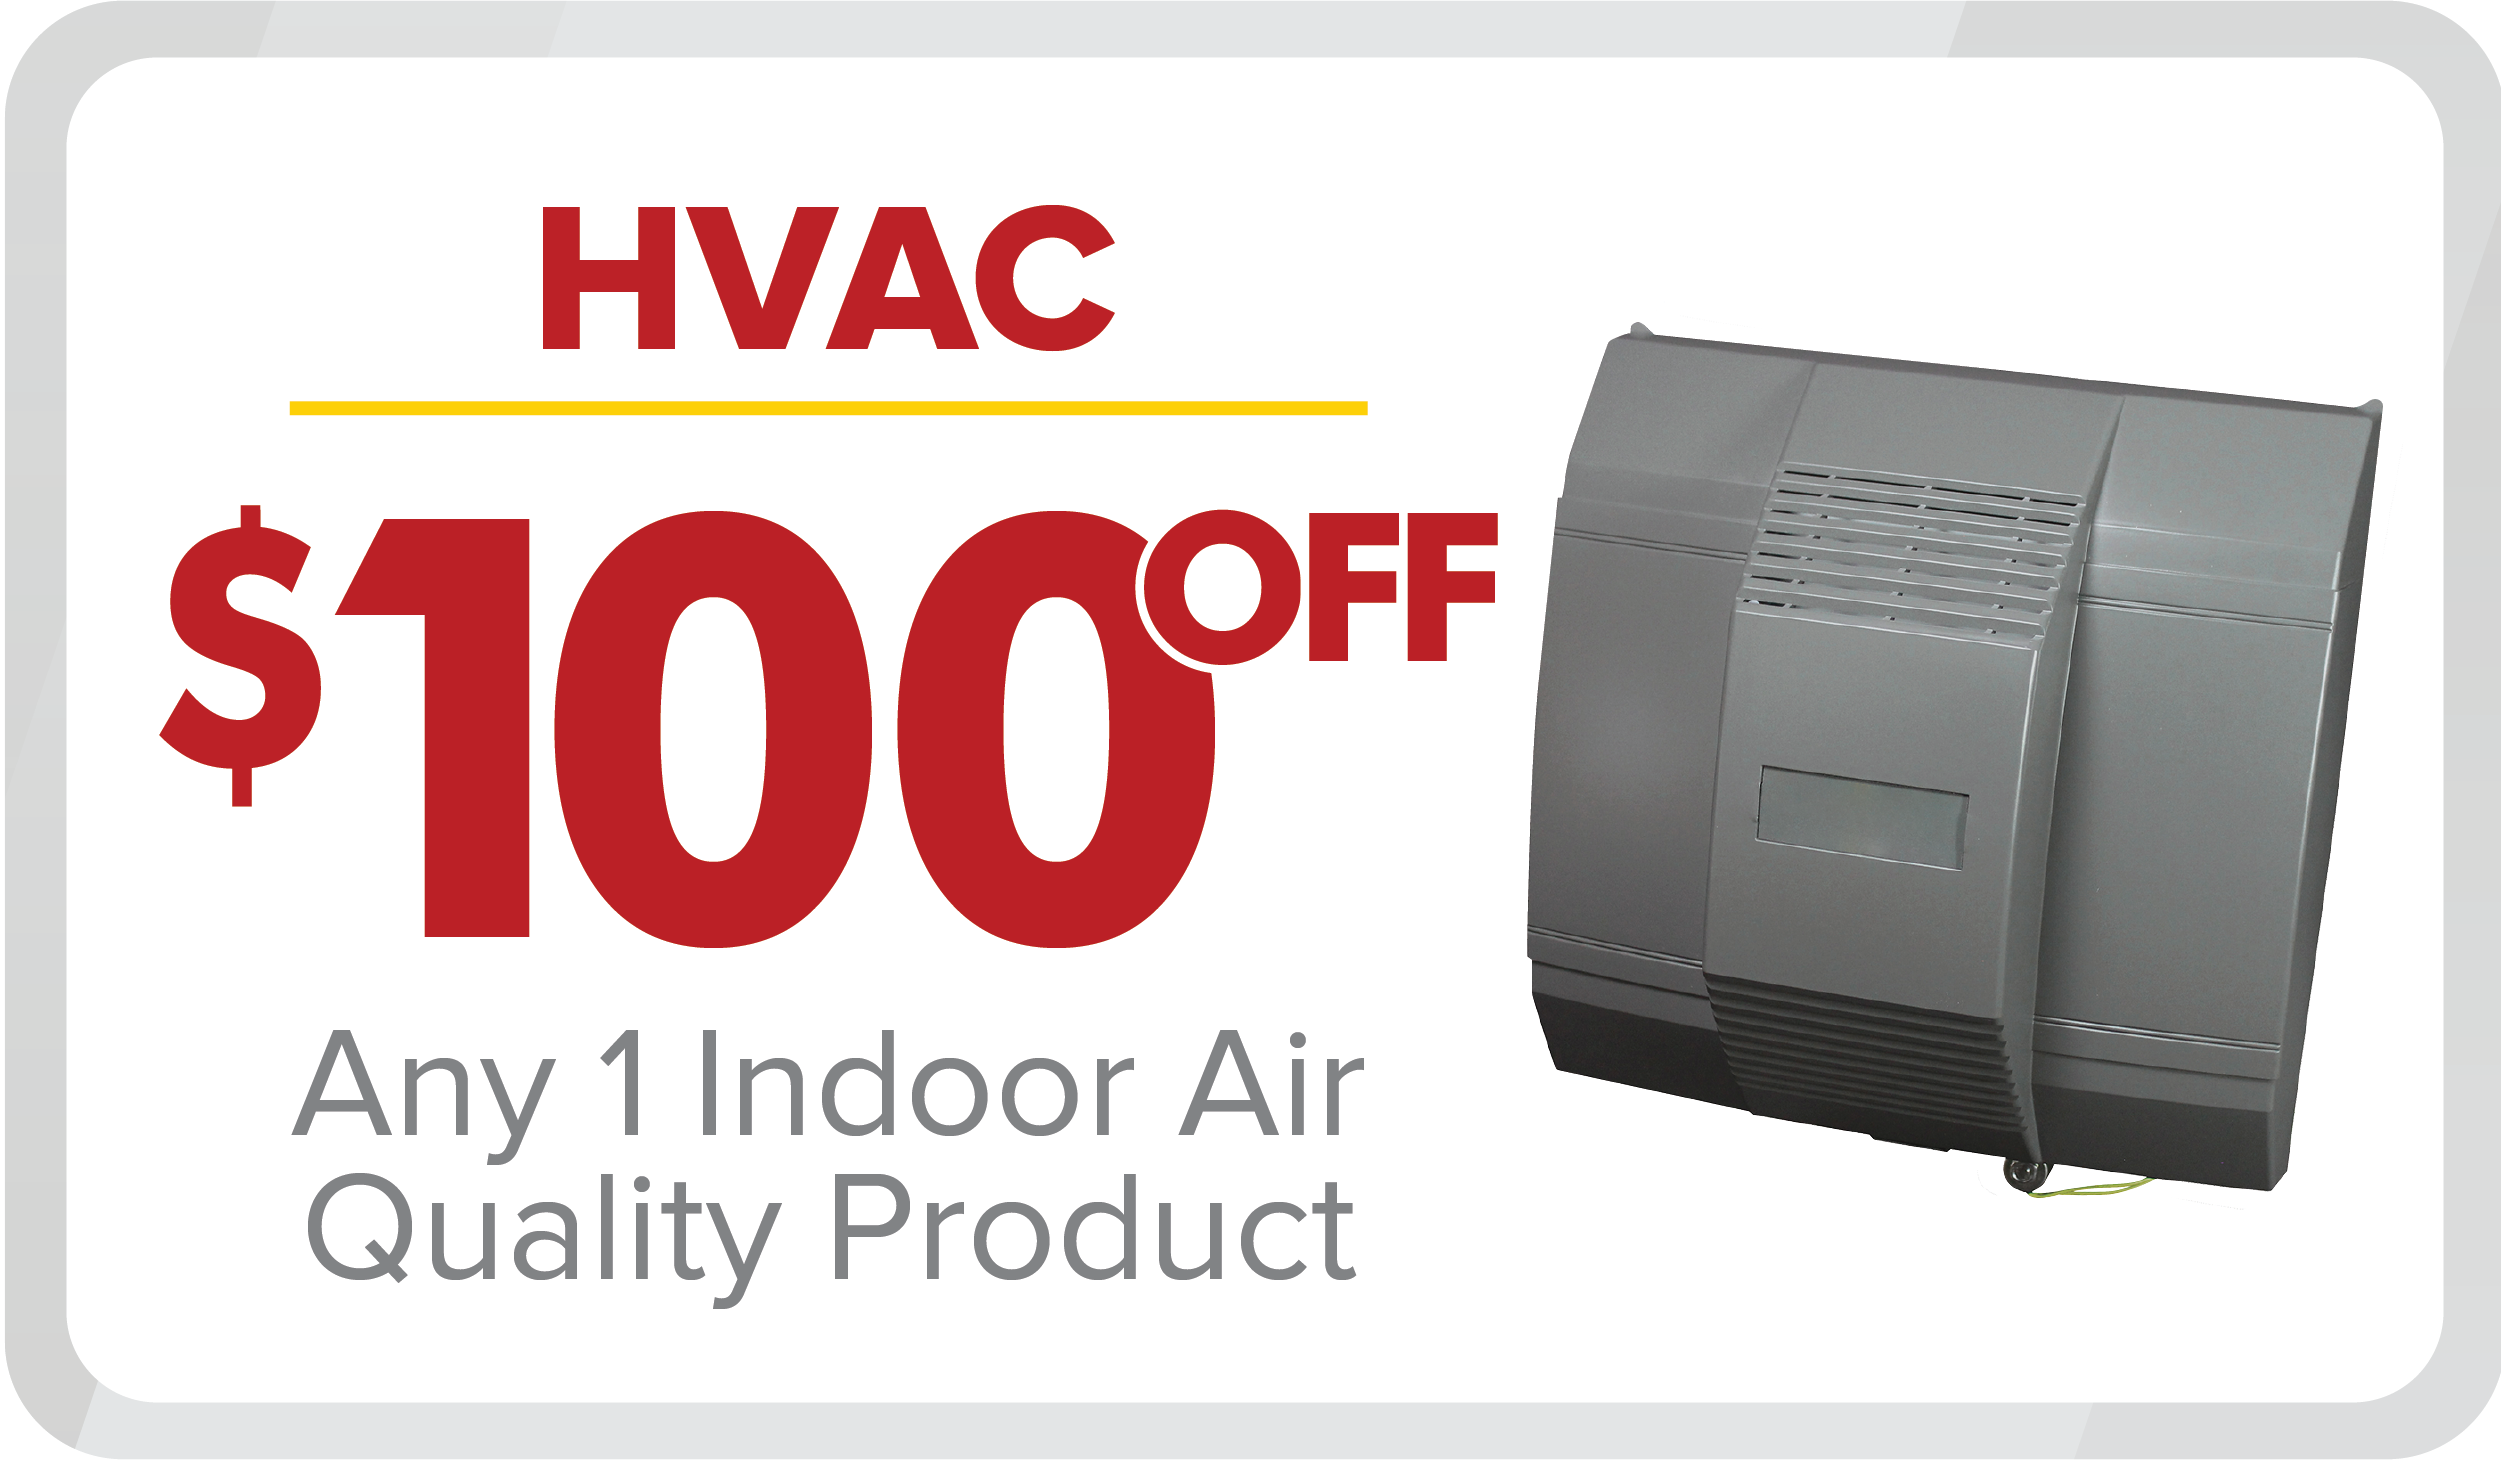 $100 OFF Indoor Air Quality Appliances